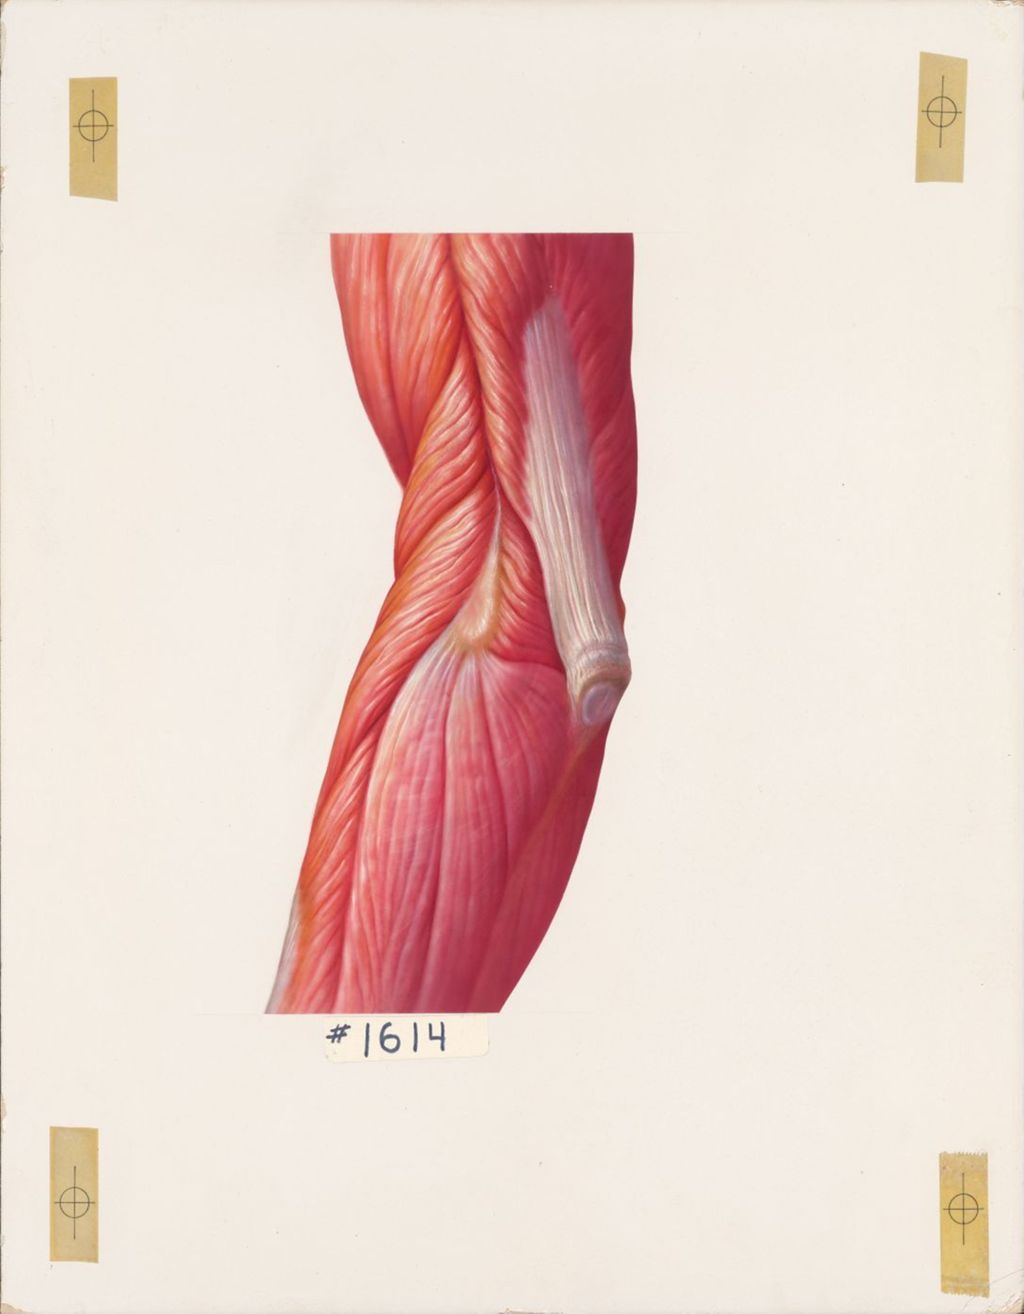 Miniature of The Elbow, The Musculature of the Elbow, Posterolateral Aspect